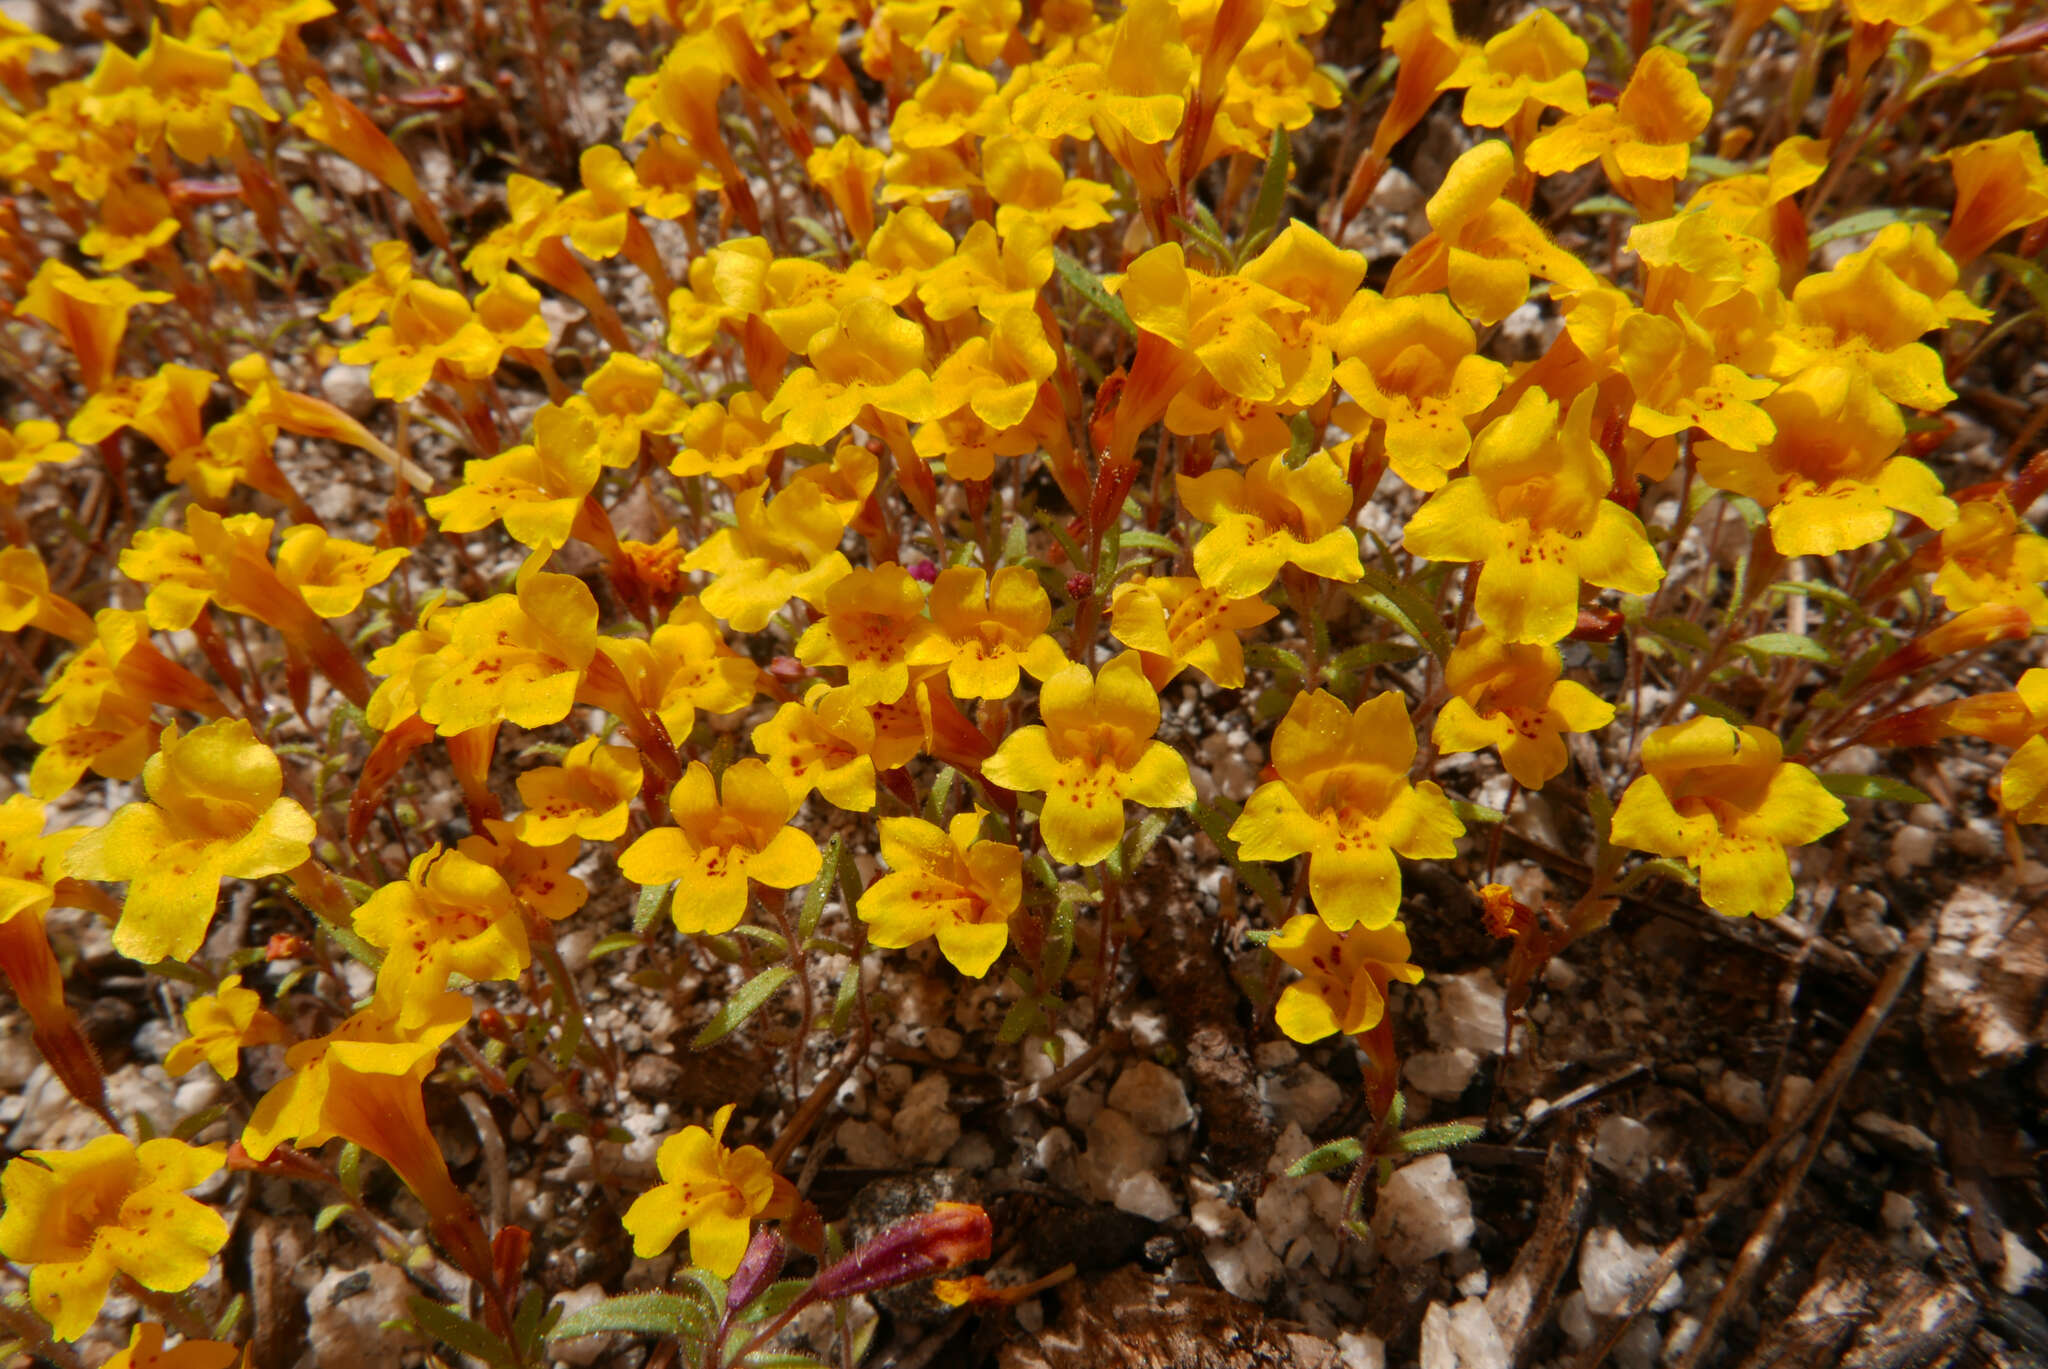 Image of mointain monkeyflower